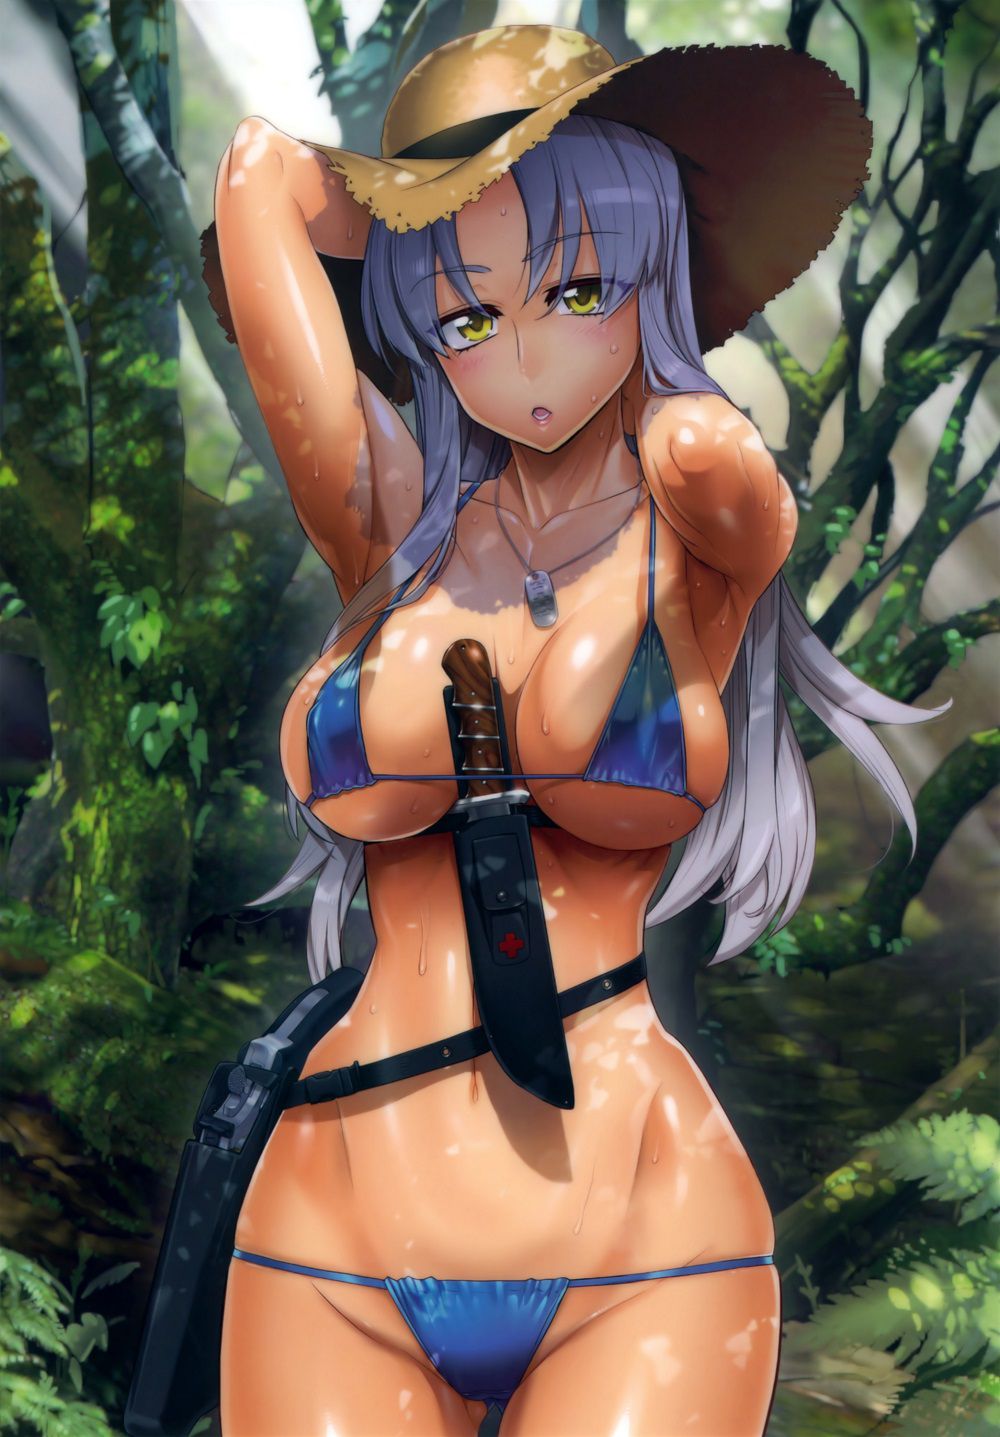 I'm wearing a straw hat 2-d girl image should (32 photos) 22